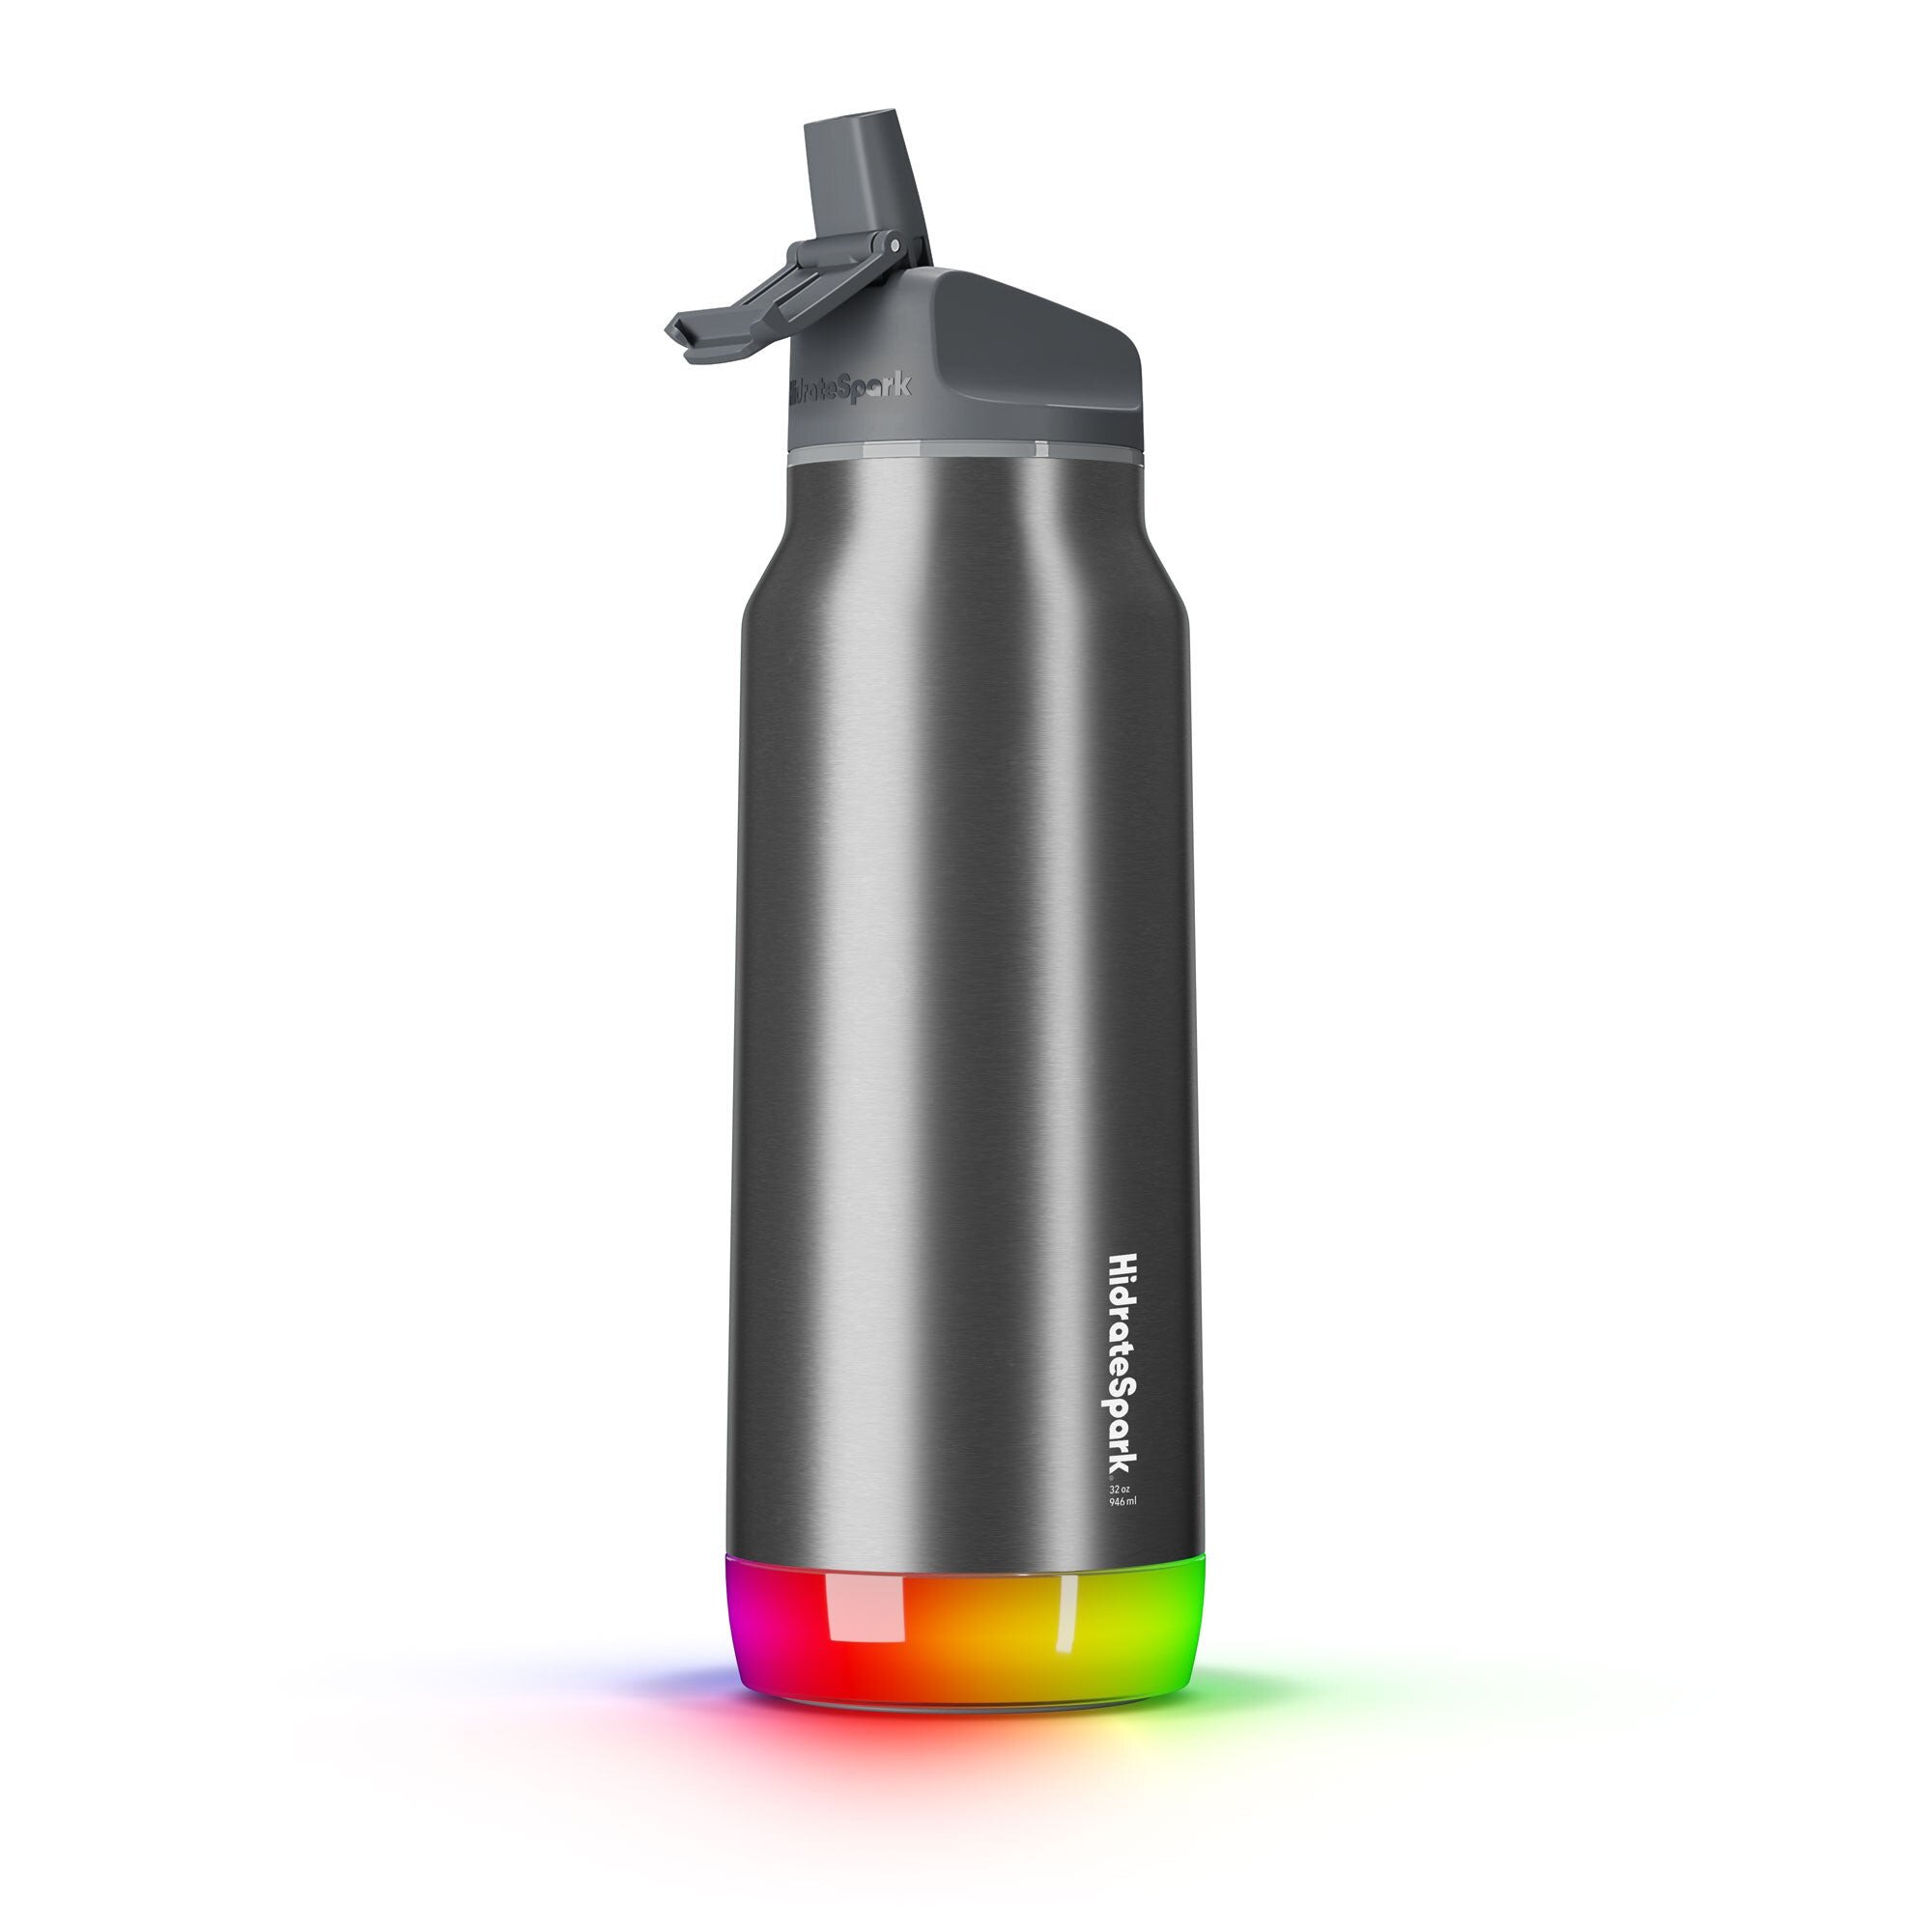 Hidrate Spark PRO Bluetooth Smart Water Bottle - 32oz Stainless Steel -  Straw - Brushed